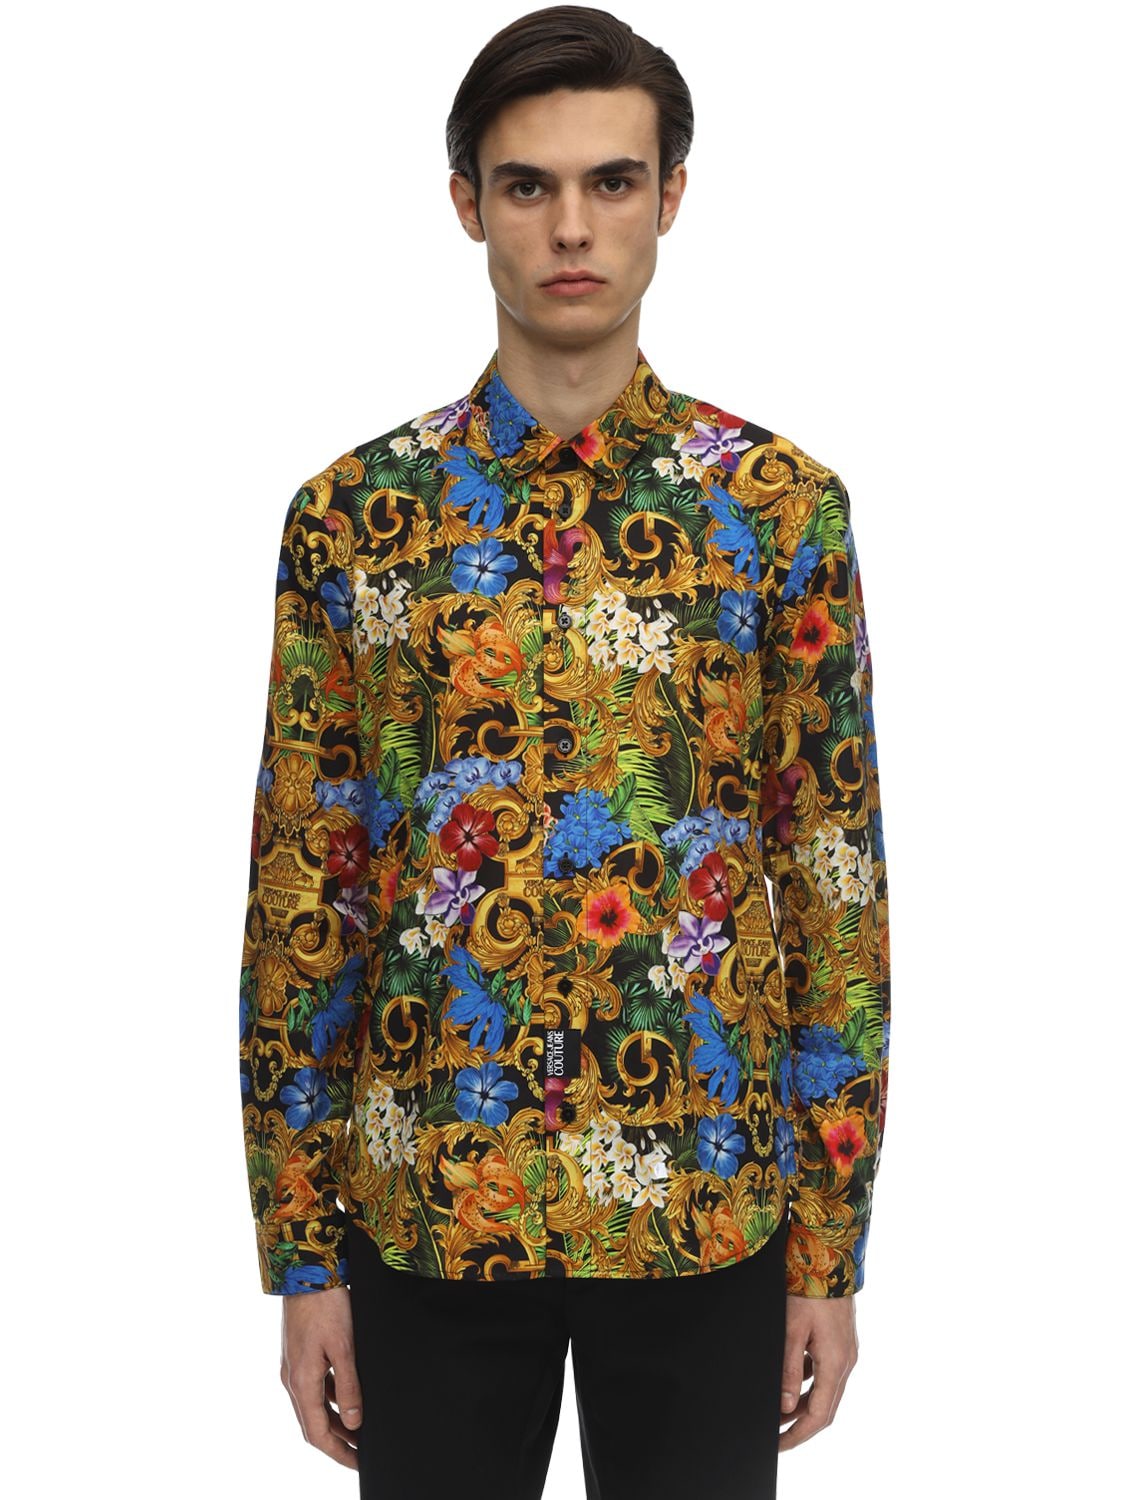 VERSACE JEANS COUTURE PRINTED SHIRT,71IBQN016-OTGZ0